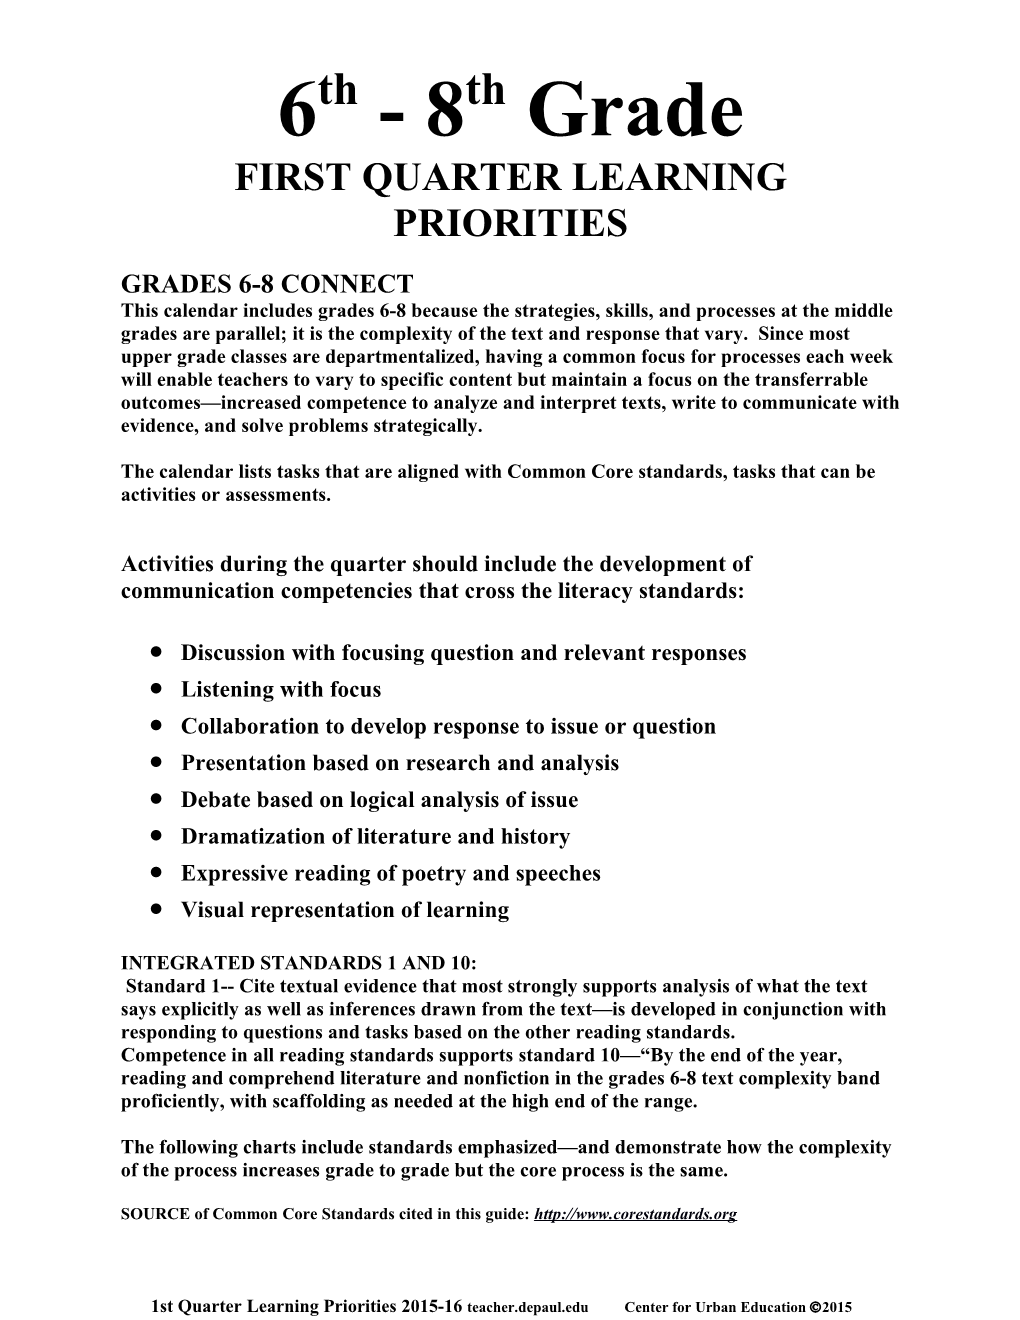 First Quarter Learning Priorities